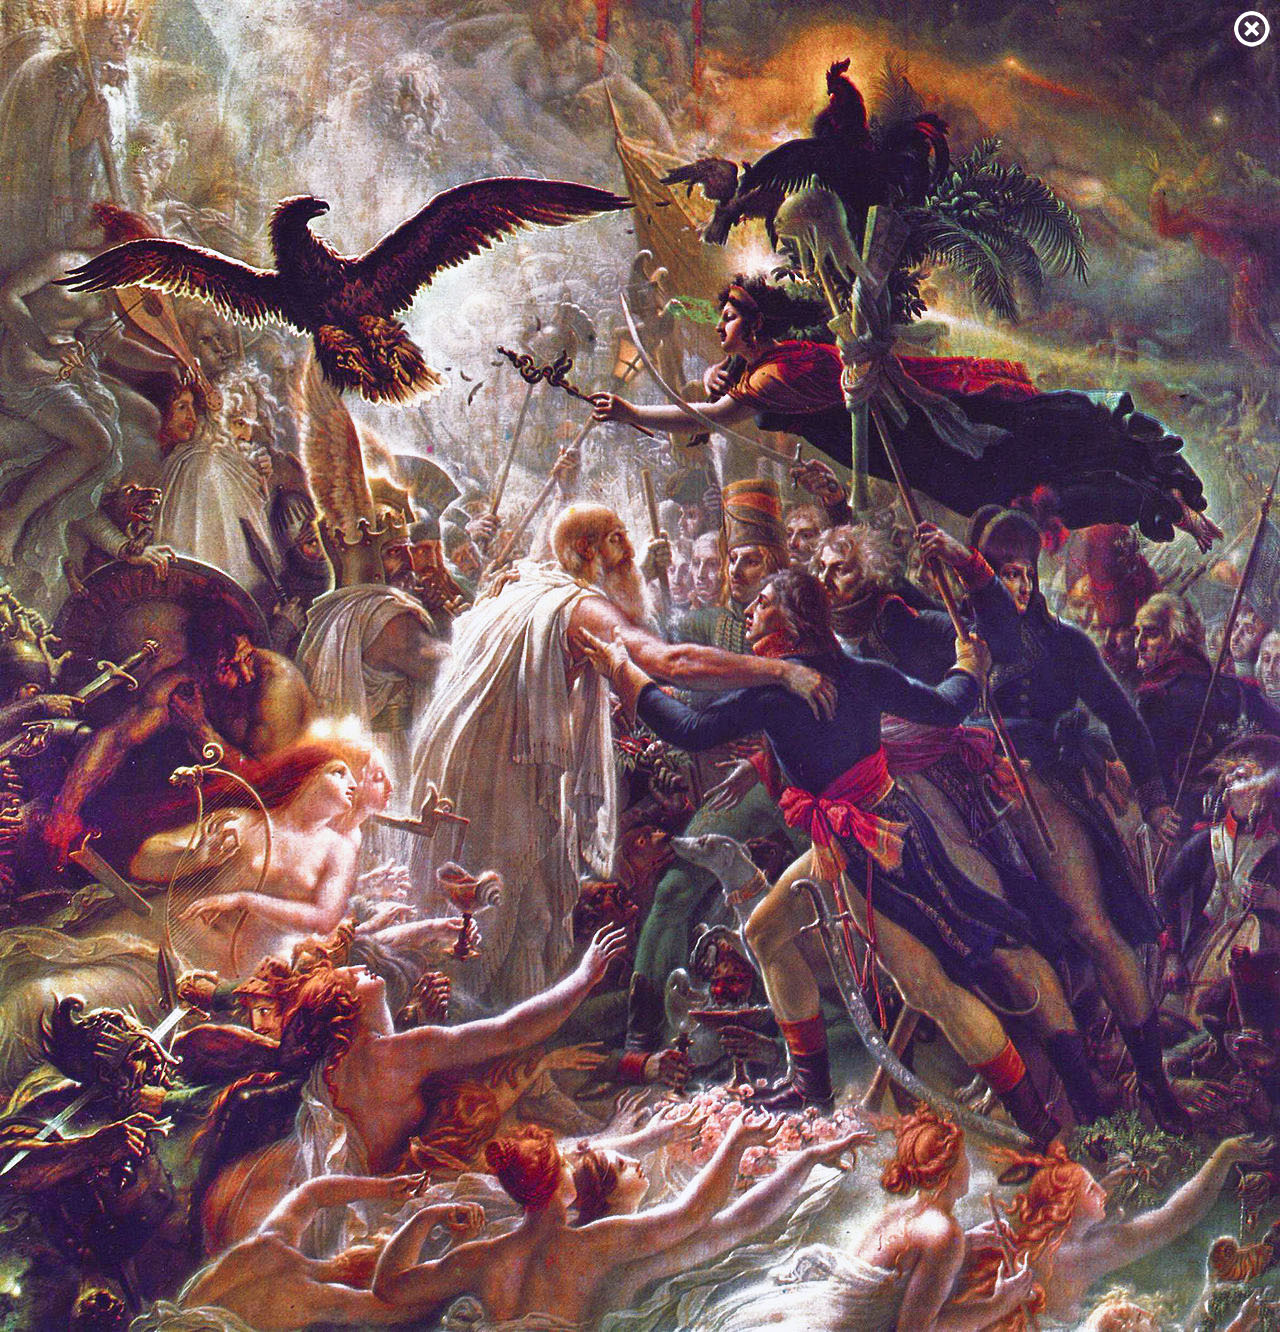 Girodet's Ossian Receiving the Ghosts of the French Heroes, 1801 (Musée national du châteaux de Malmaison, 75.5 x 72 inches)